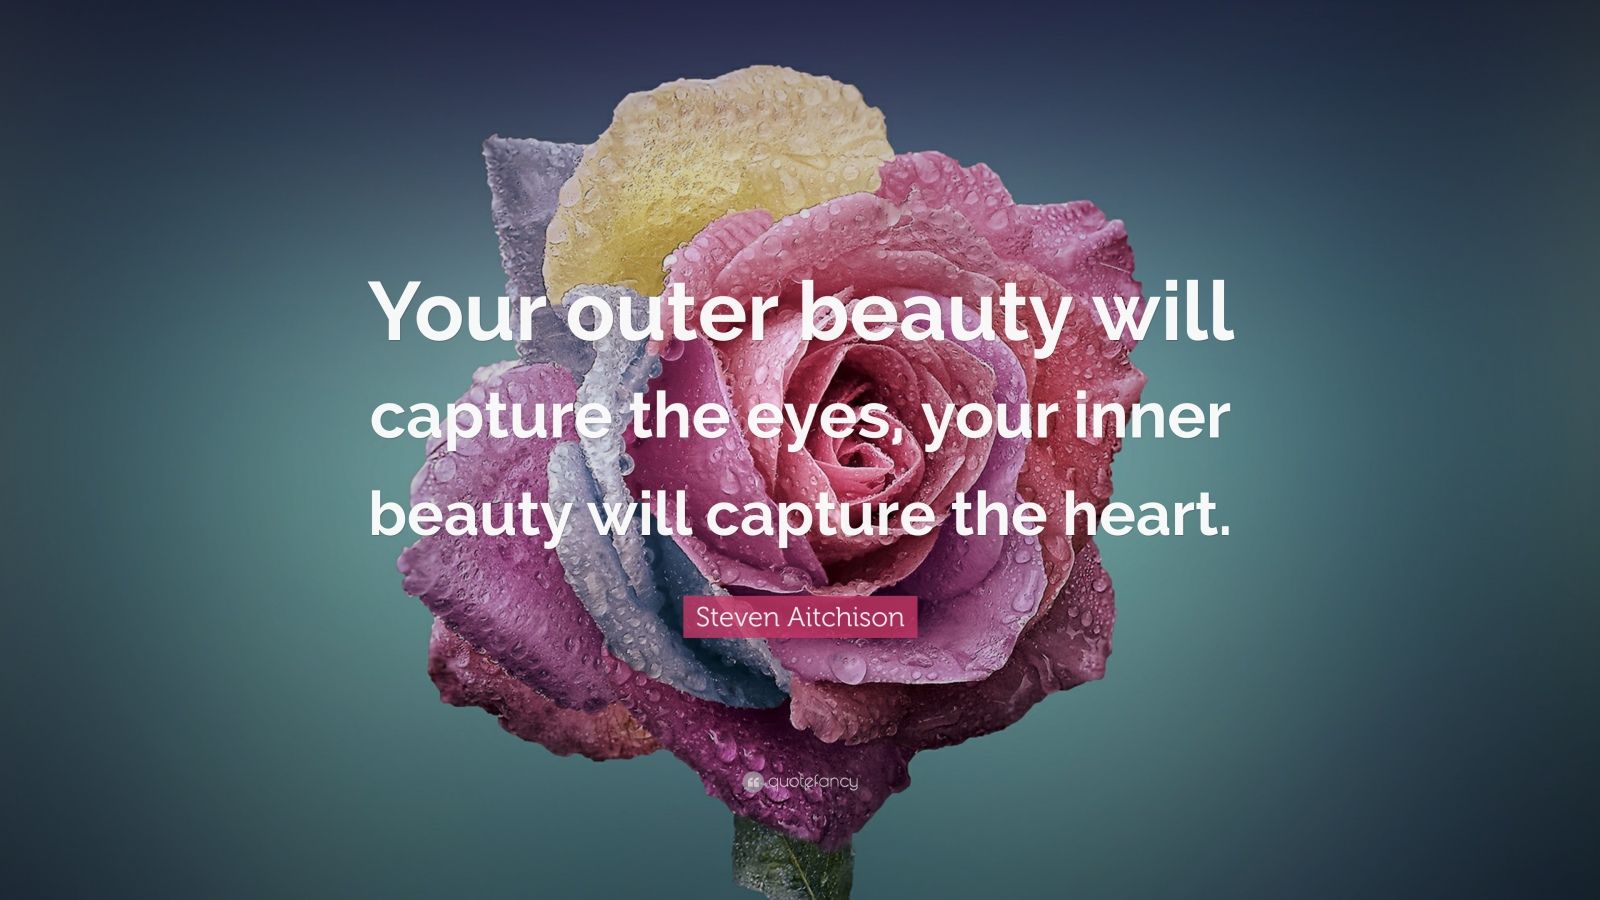 Steven Aitchison Quote: “Your outer beauty will capture the eyes, your